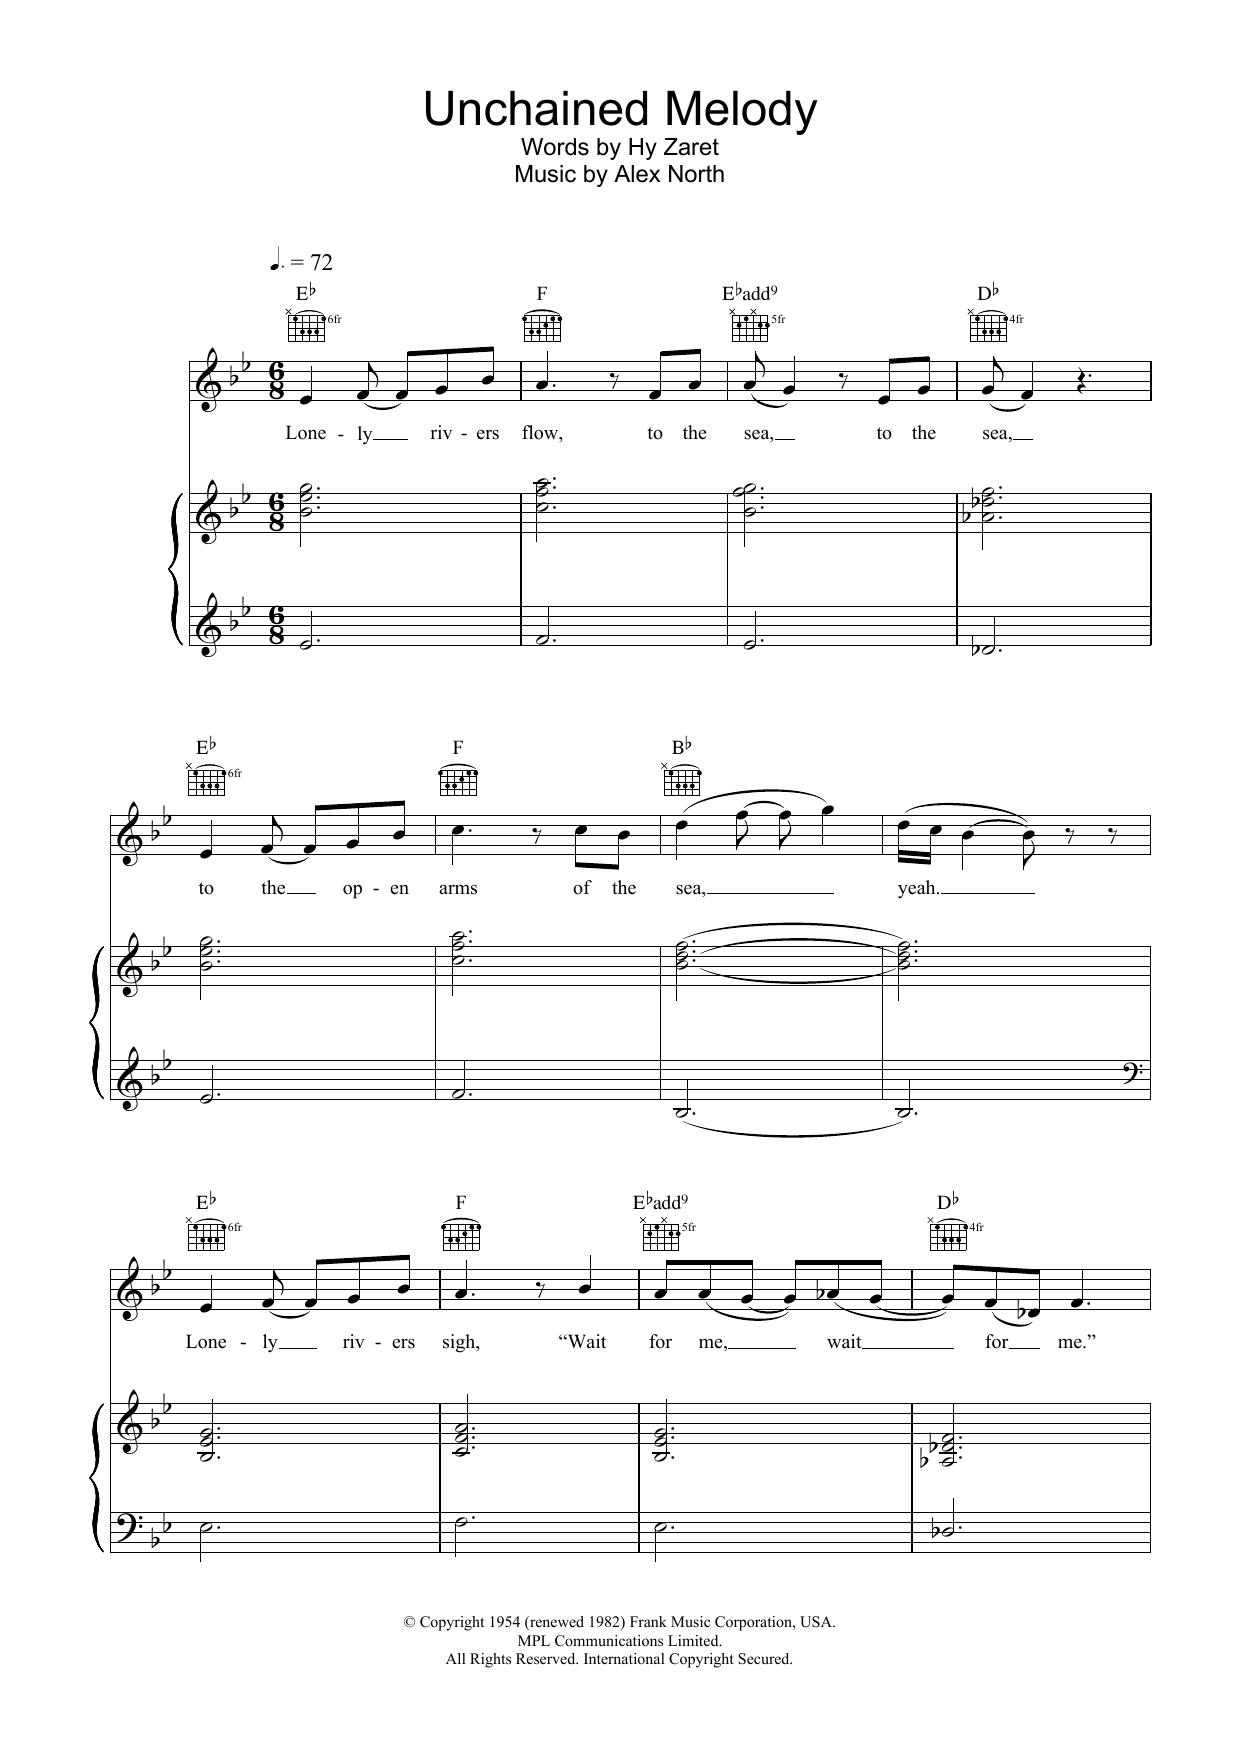 Gareth Gates Unchained Melody sheet music notes and chords. Download Printable PDF.